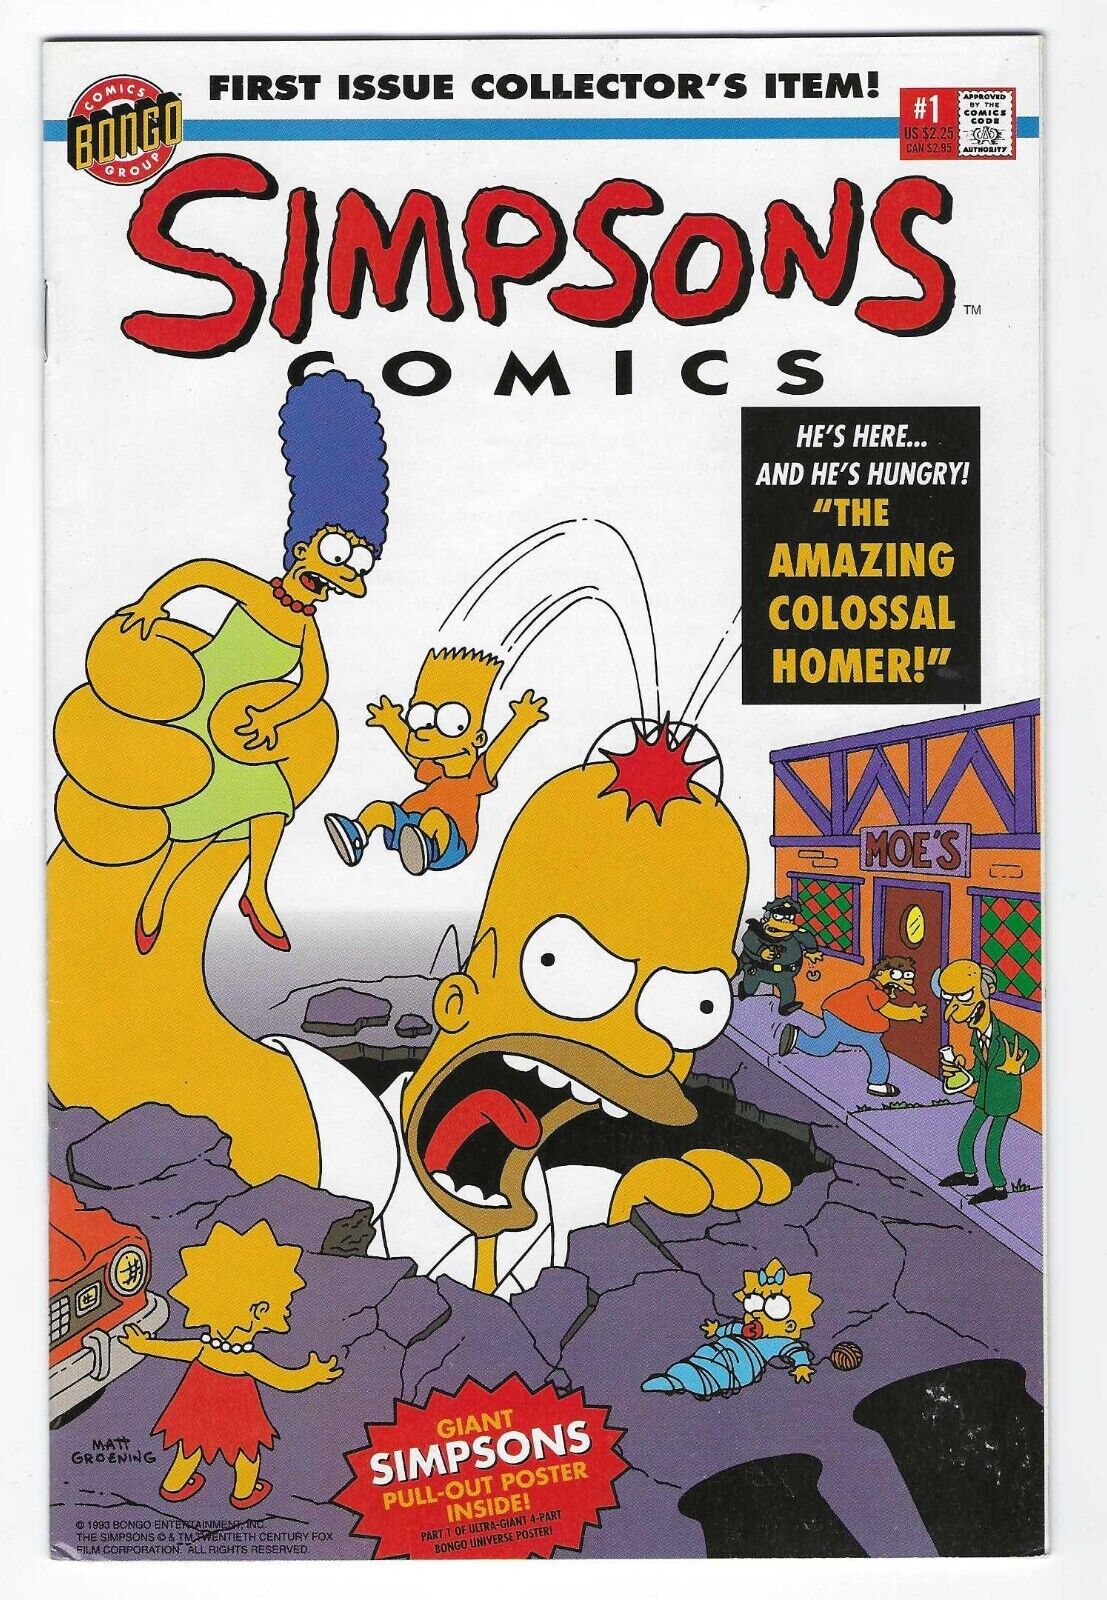 SIMPSONS COMICS #1 (1993)-1ST APPEARANCE OF THE SIMPSONS-INCL. POSTER-BONGO- VF+